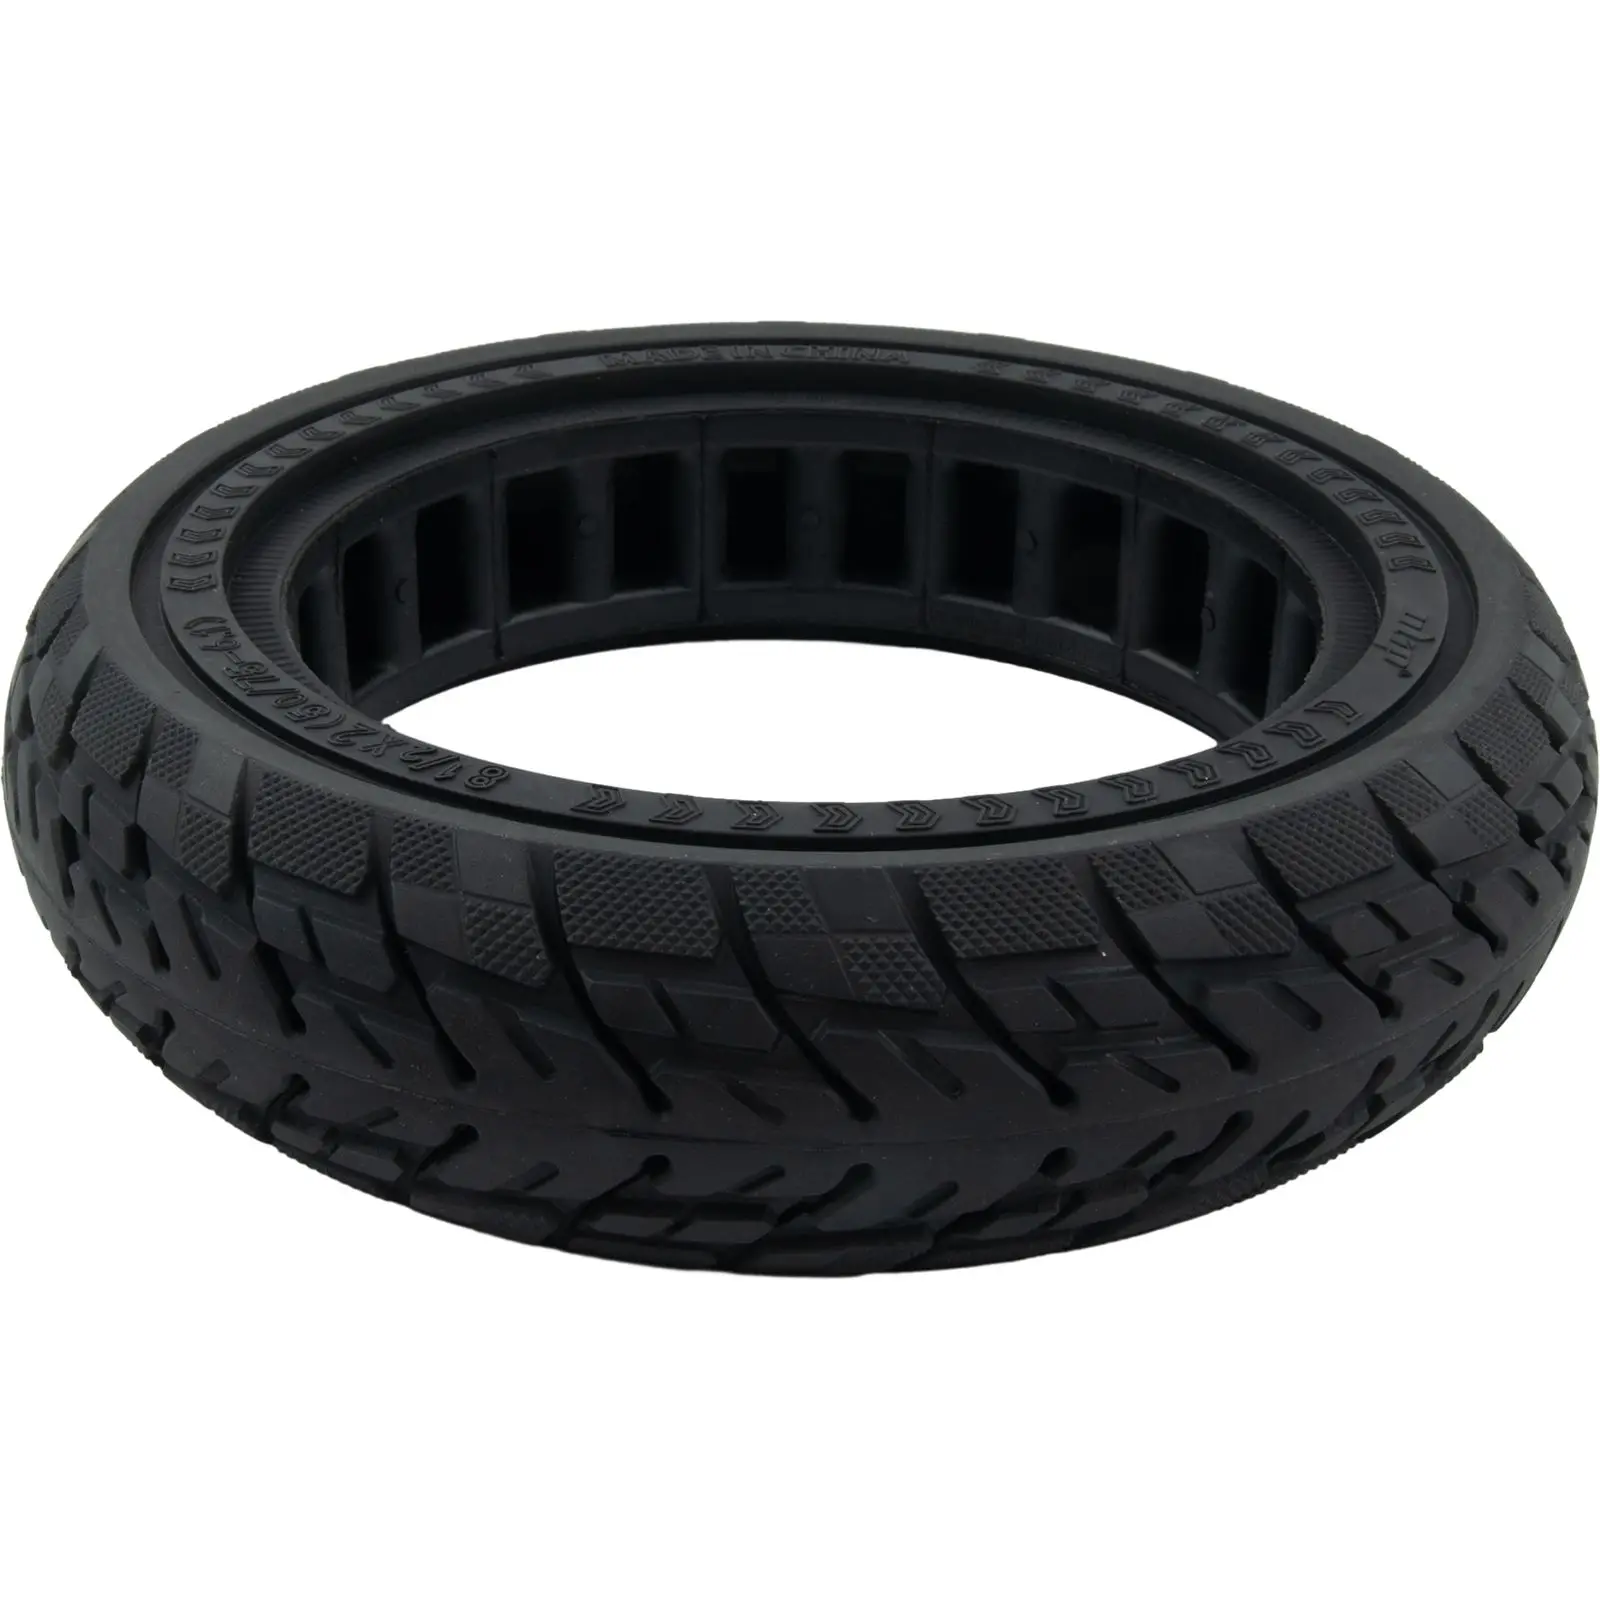 

Durable High Quality Material Practical Brand New Solid Tire Rubber Tubeless Black Roads Weight 720g Cycle M365